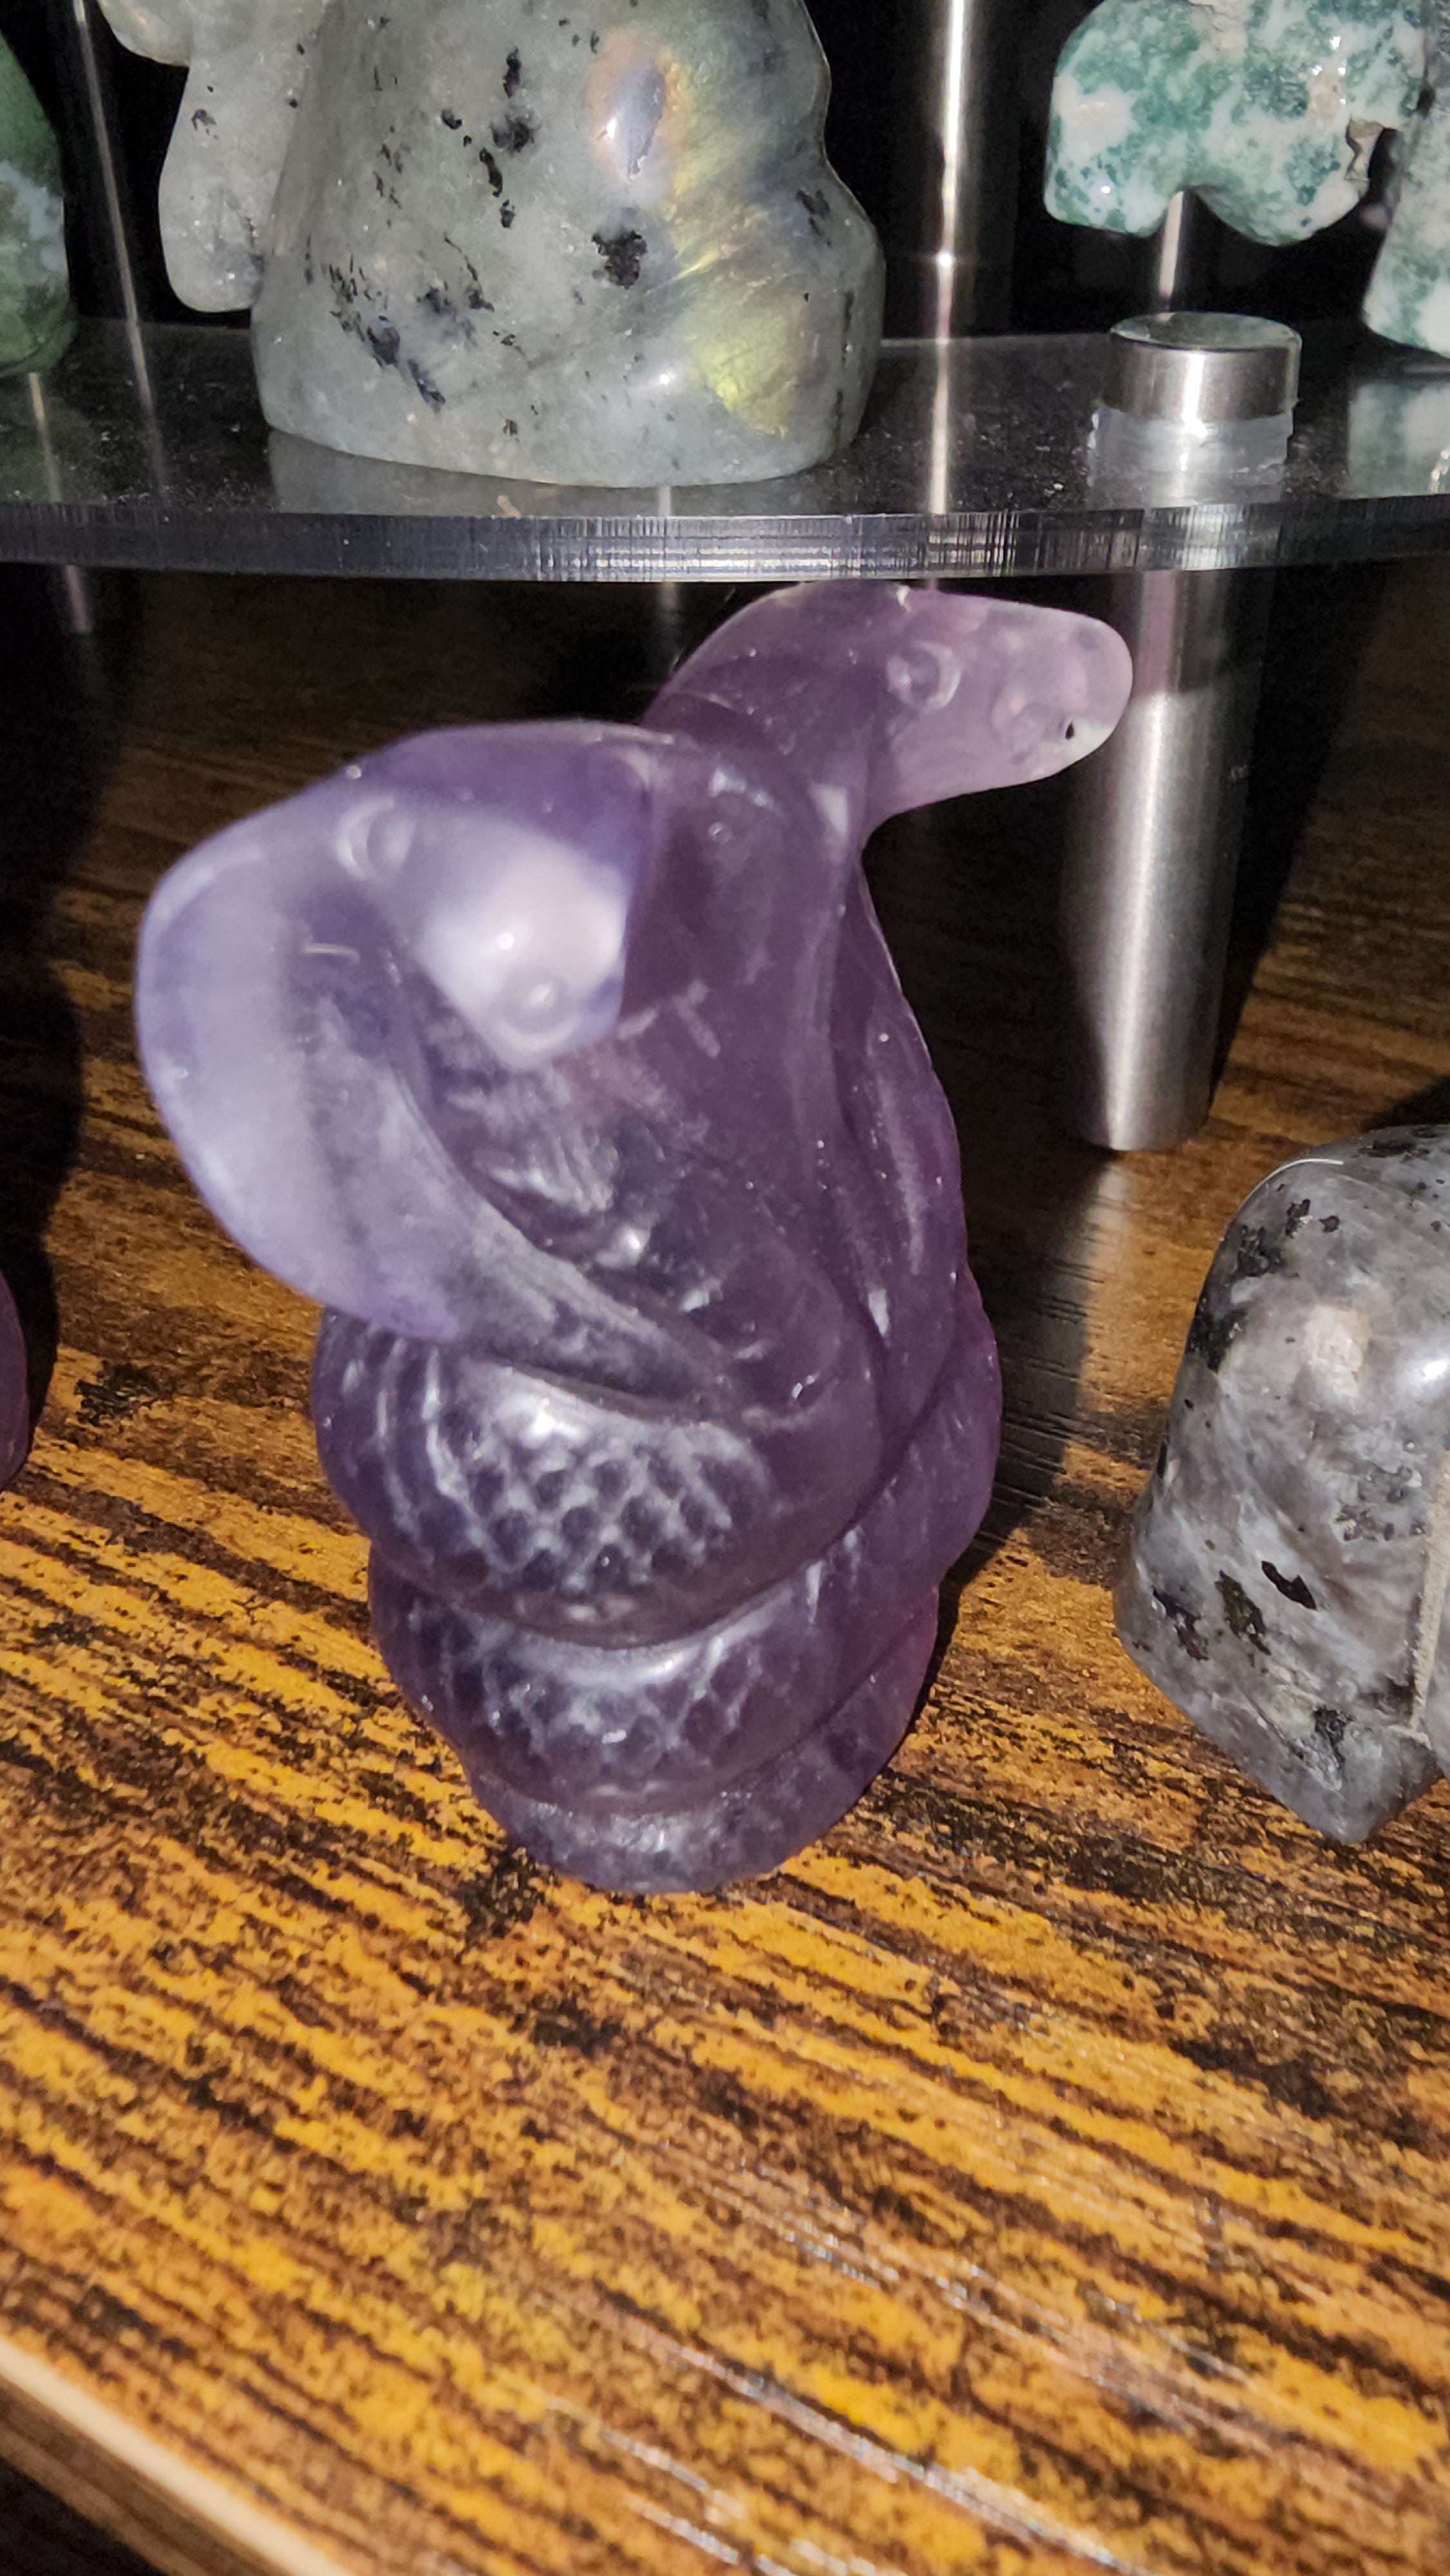 Fluorite two-headed snakes crystal carving